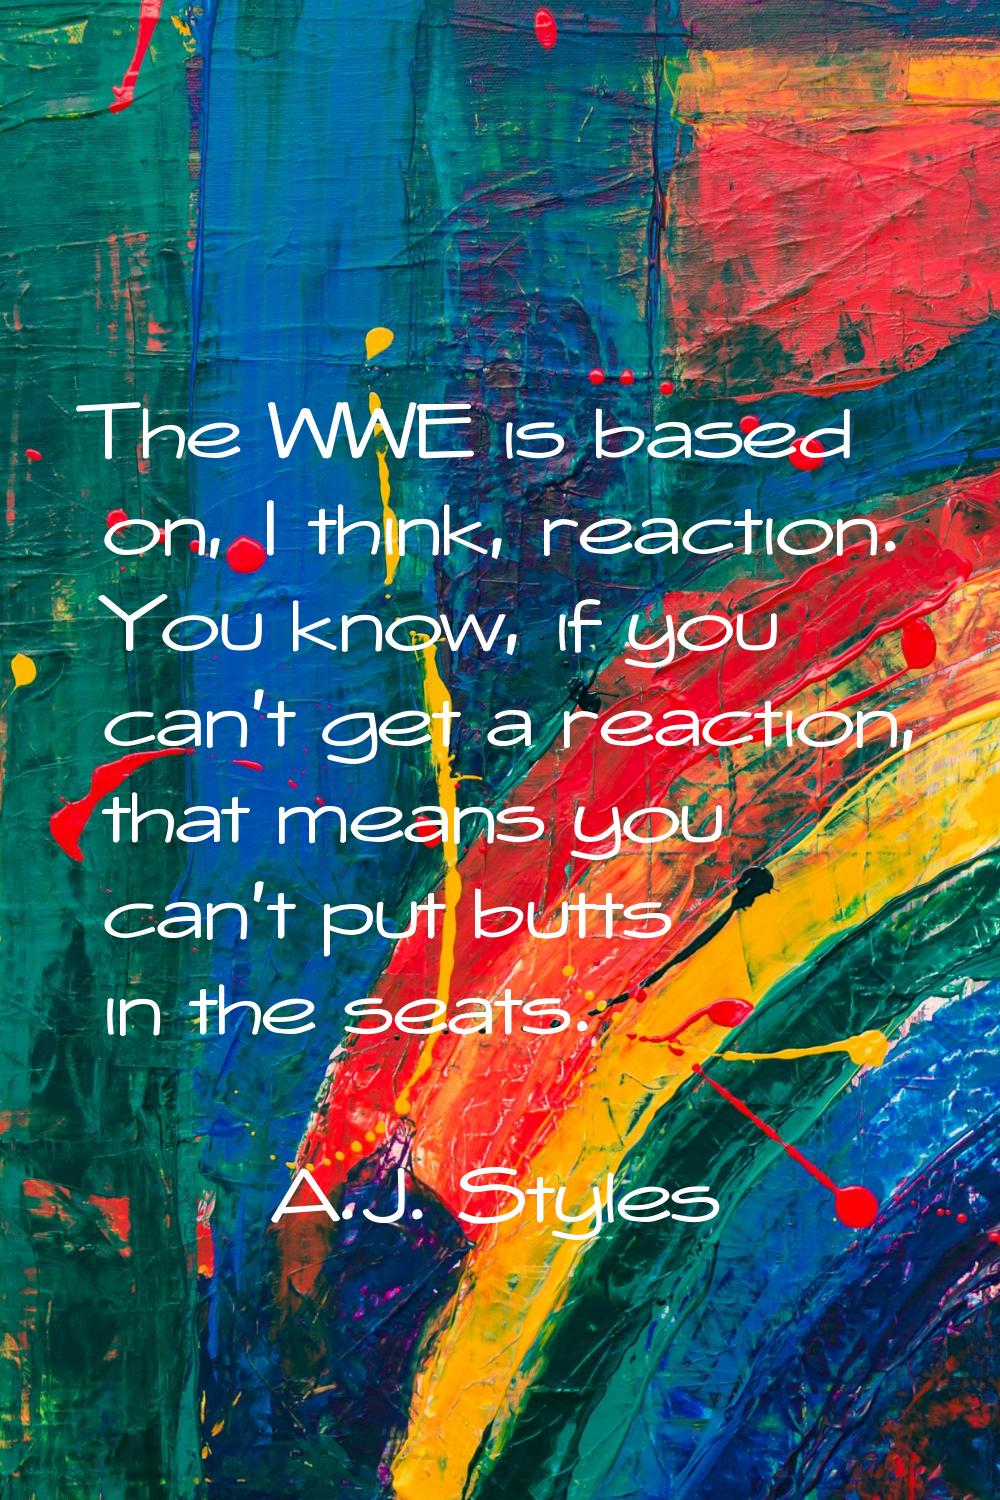 The WWE is based on, I think, reaction. You know, if you can't get a reaction, that means you can't